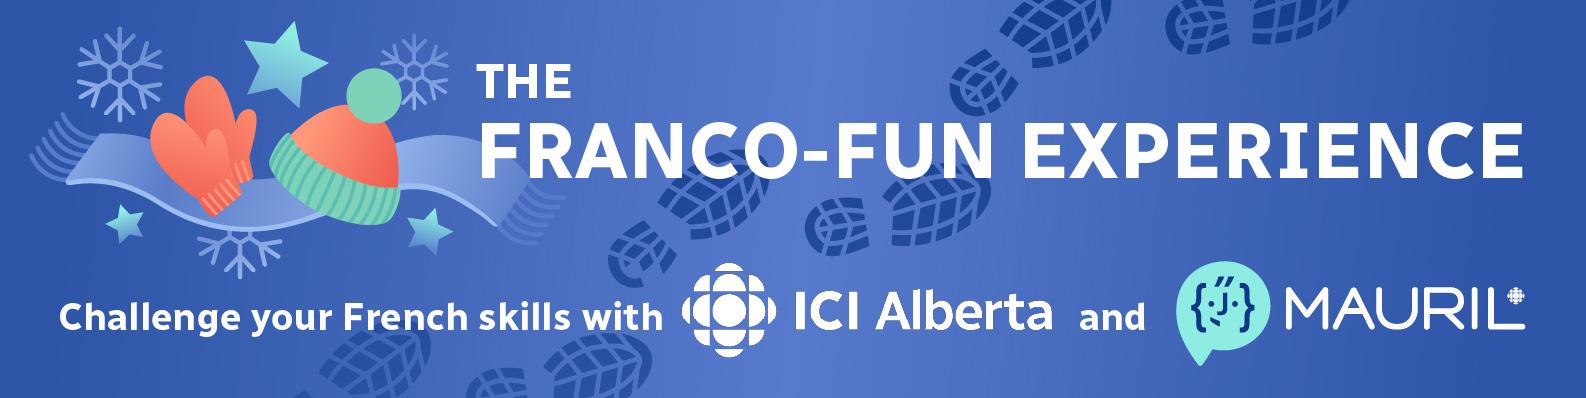 Challenge your French skills with ICI Alberta and Mauril.